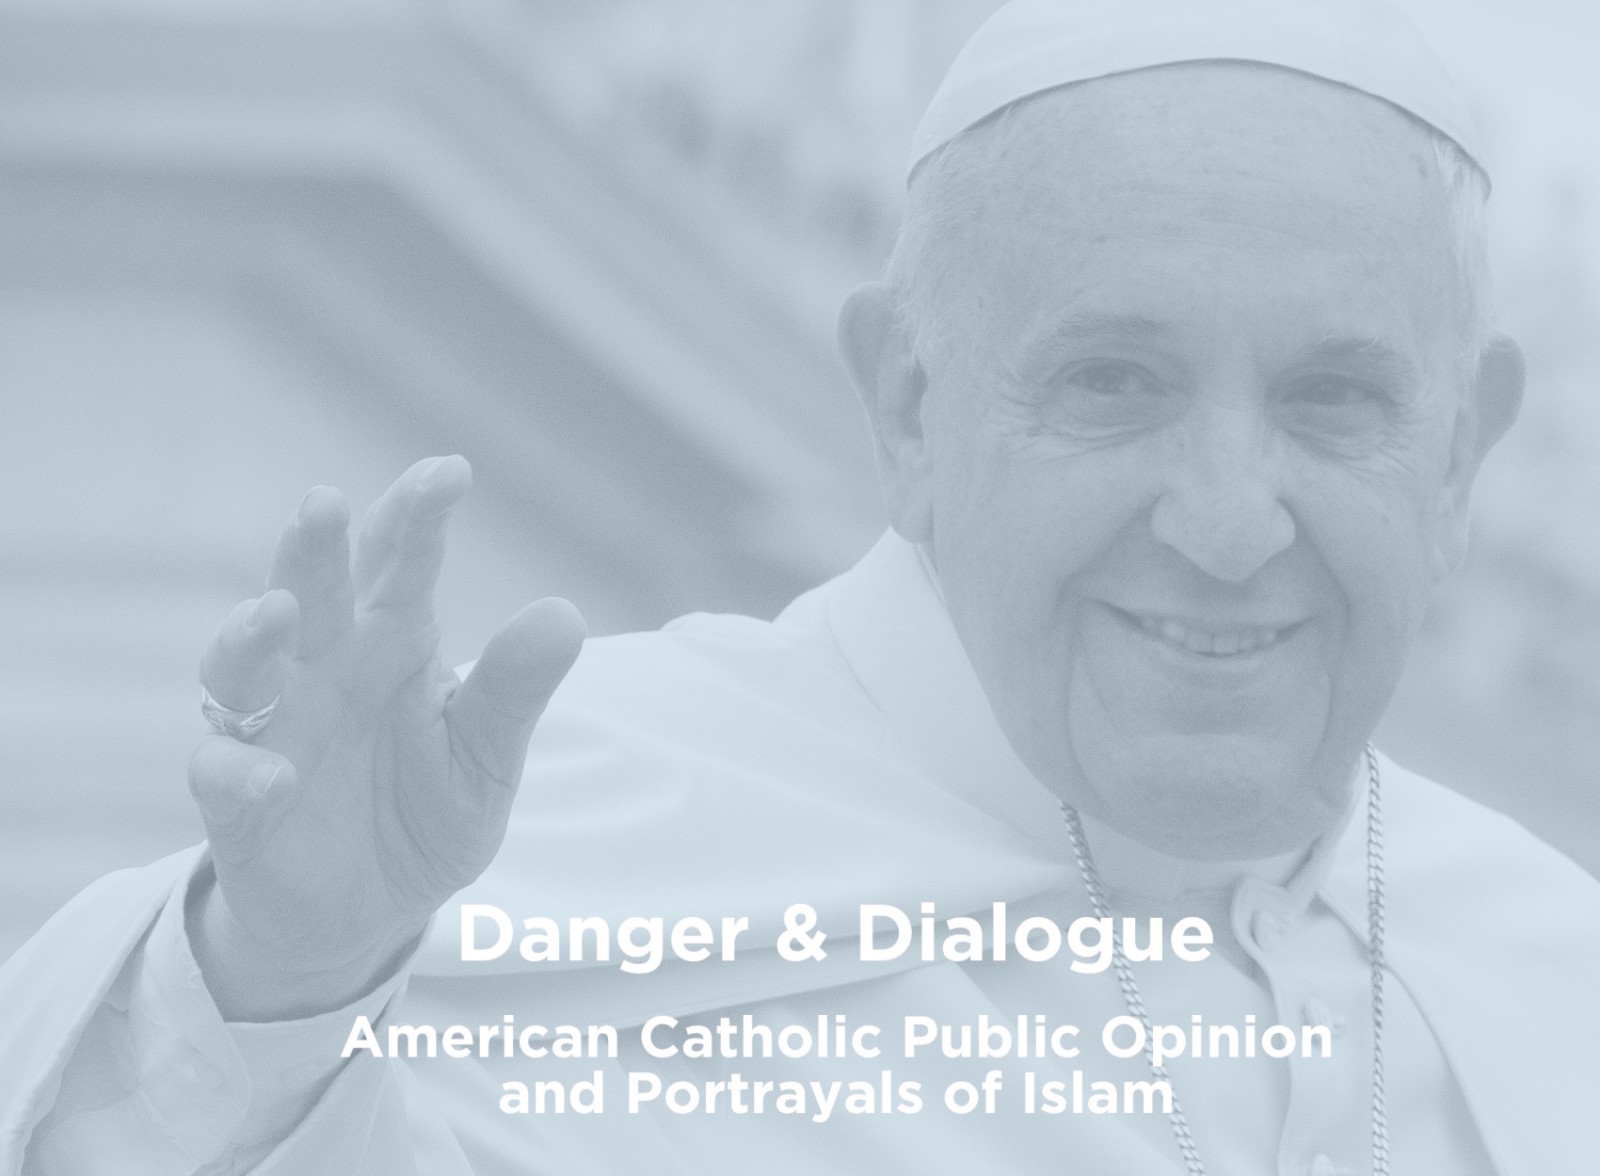 Danger & Dialogue: American Catholic Public Opinion and Portrayals of Islam